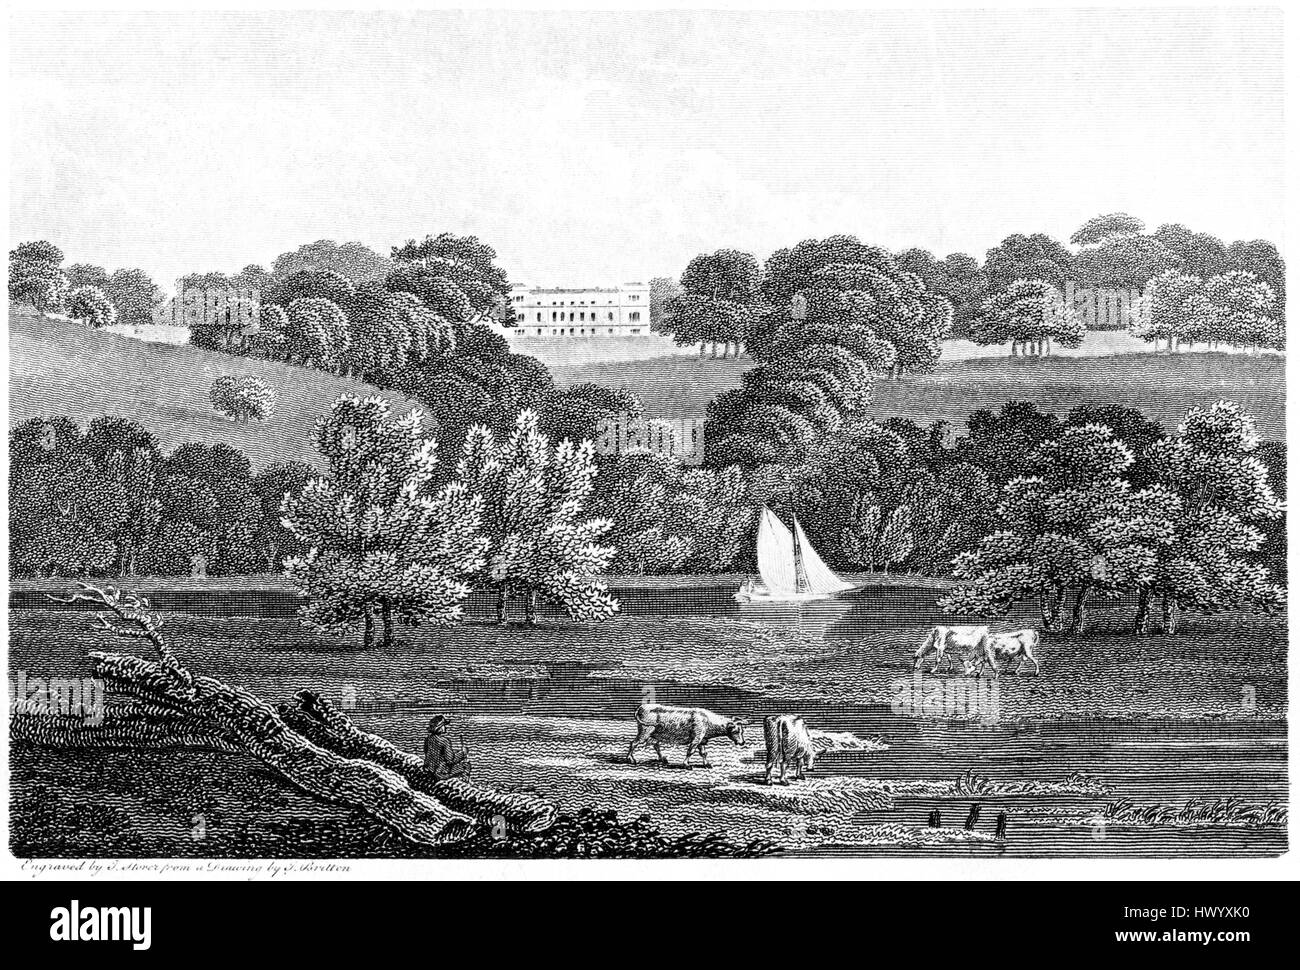 An engraving of Park Place, Berkshire scanned at high resolution from a book printed in 1812.  .Believed copyright free. Stock Photo